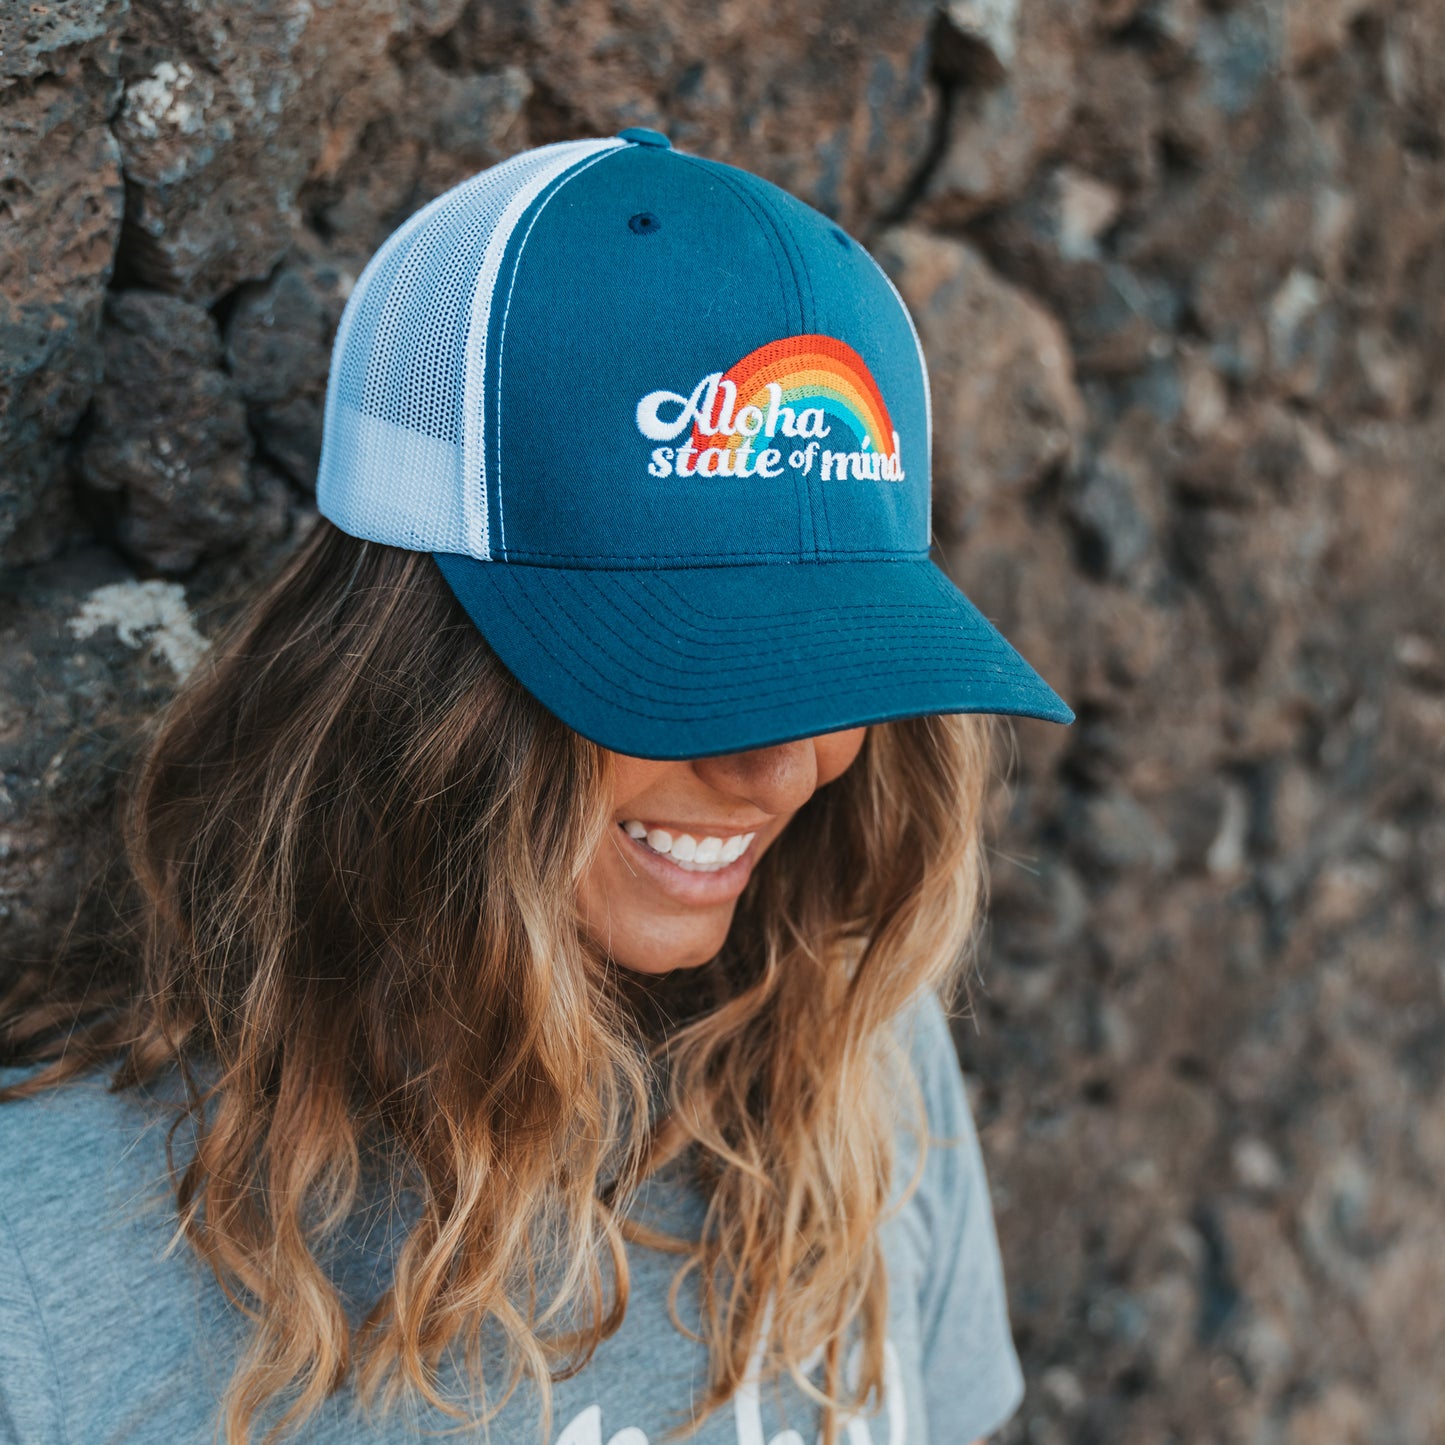 Aloha State of Mind Retro Trucker Hat side view